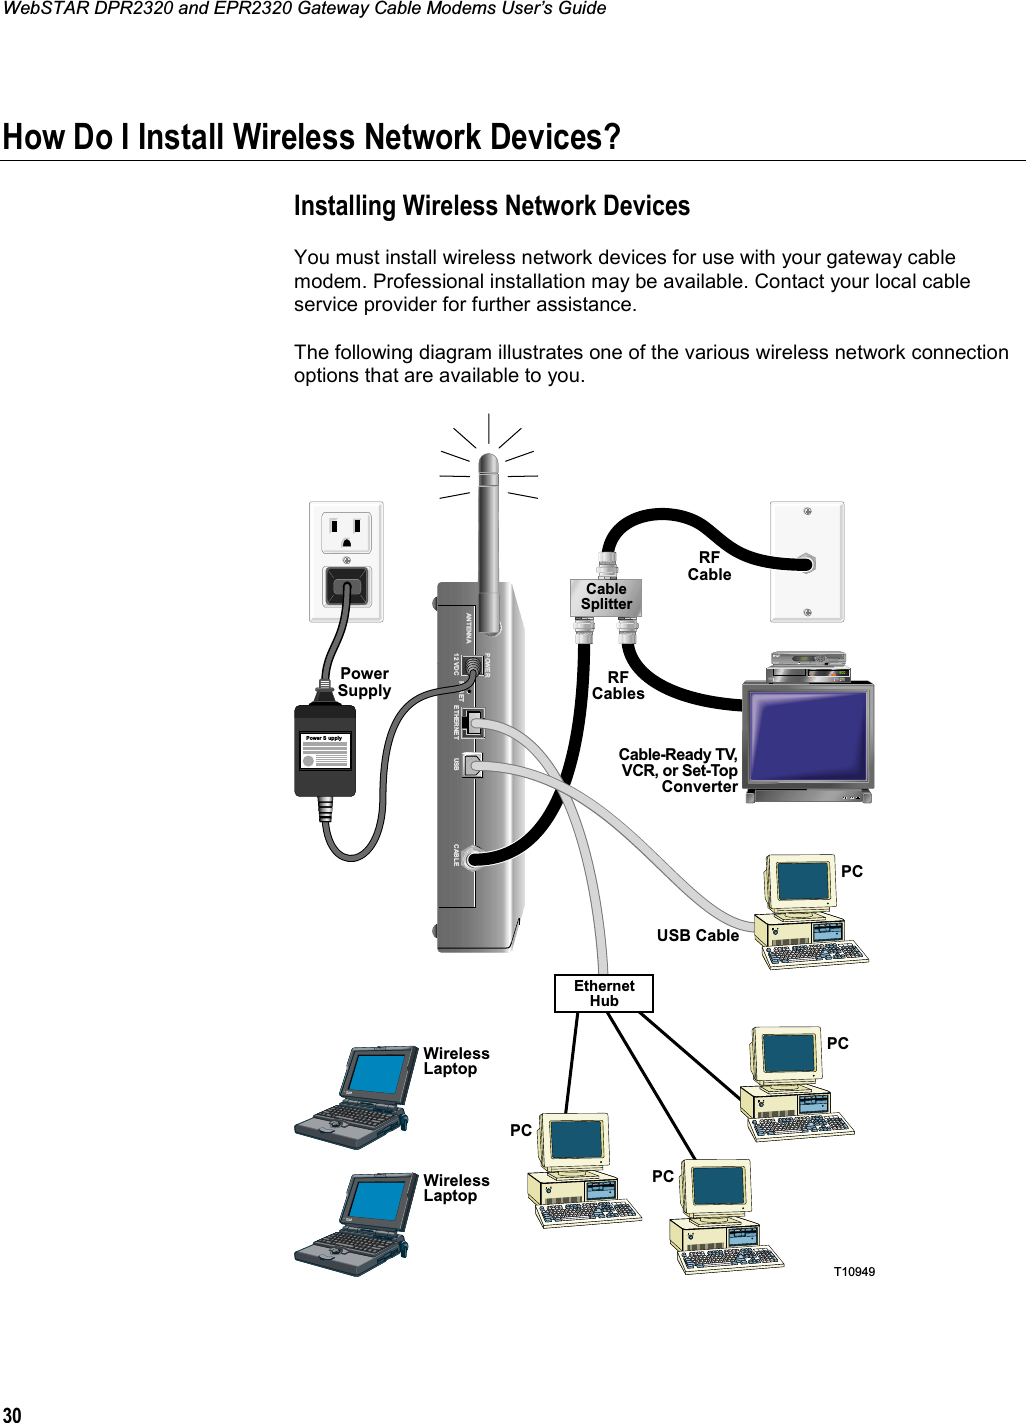 WebSTAR DPR2320 and EPR2320 Gateway Cable Modems User’s Guide 30How Do I Install Wireless Network Devices?Installing Wireless Network Devices You must install wireless network devices for use with your gateway cable modem. Professional installation may be available. Contact your local cable service provider for further assistance. The following diagram illustrates one of the various wireless network connection options that are available to you. POWERANTENNA12 VDC RESET ETHERNET CABLEUSBPowerSupplyCable-Ready TV, VCR, or Set-TopConverterPCUSB CableRFCableRFCablesCableSplitterT10949Power SupplyBYPASSVOLñVOL+CH+CHñMENU GUIDE INFO A/B POWEREthernetHubPCPCWirelessLaptopPCWirelessLaptop